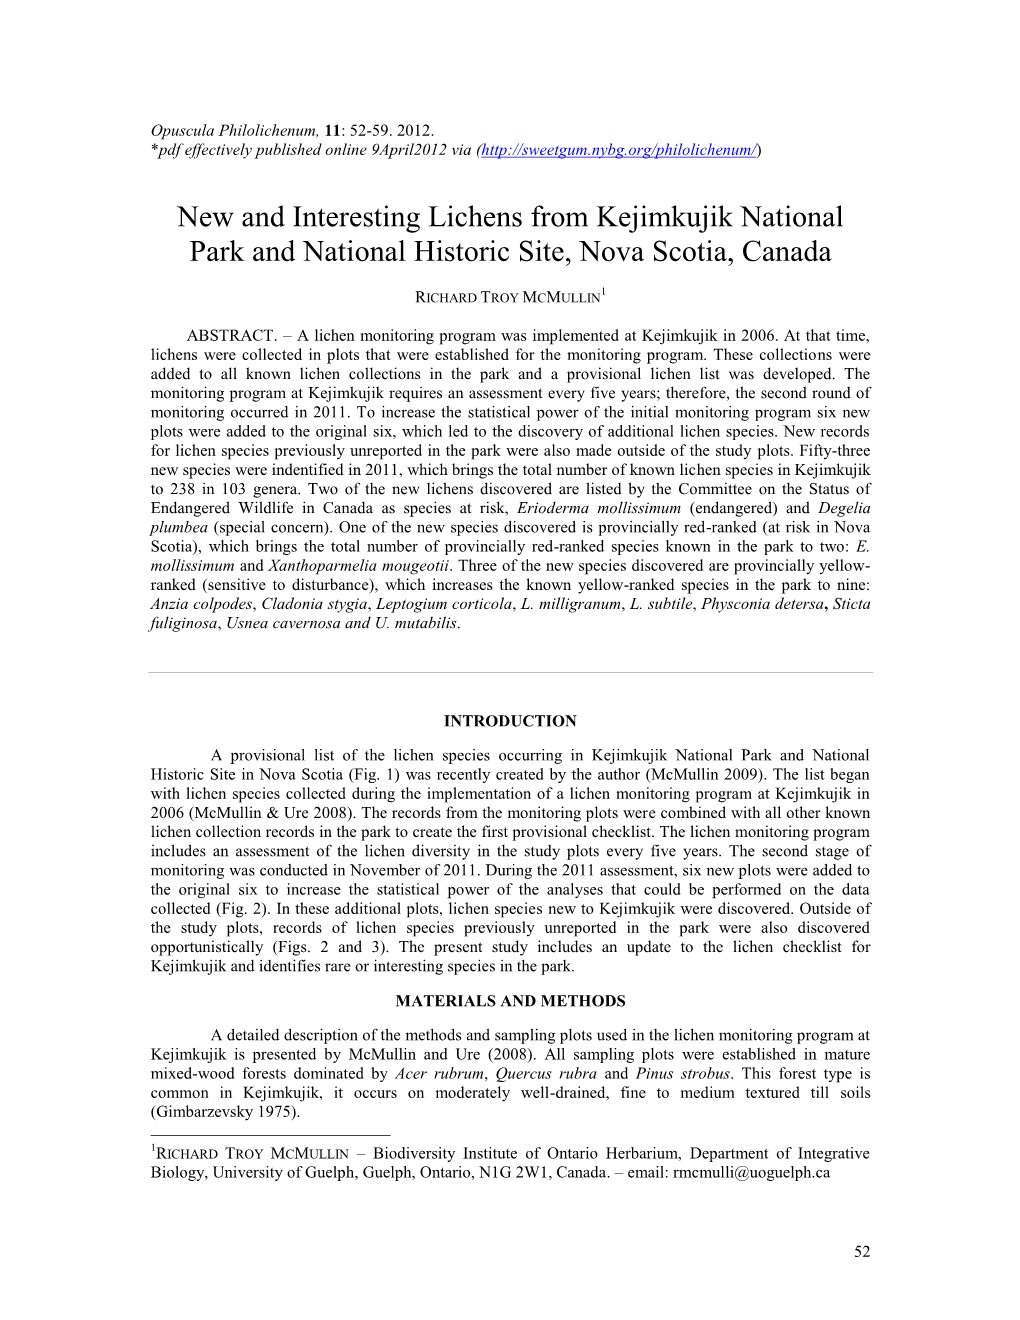 New and Interesting Lichens from Kejimkujik National Park and National Historic Site, Nova Scotia, Canada